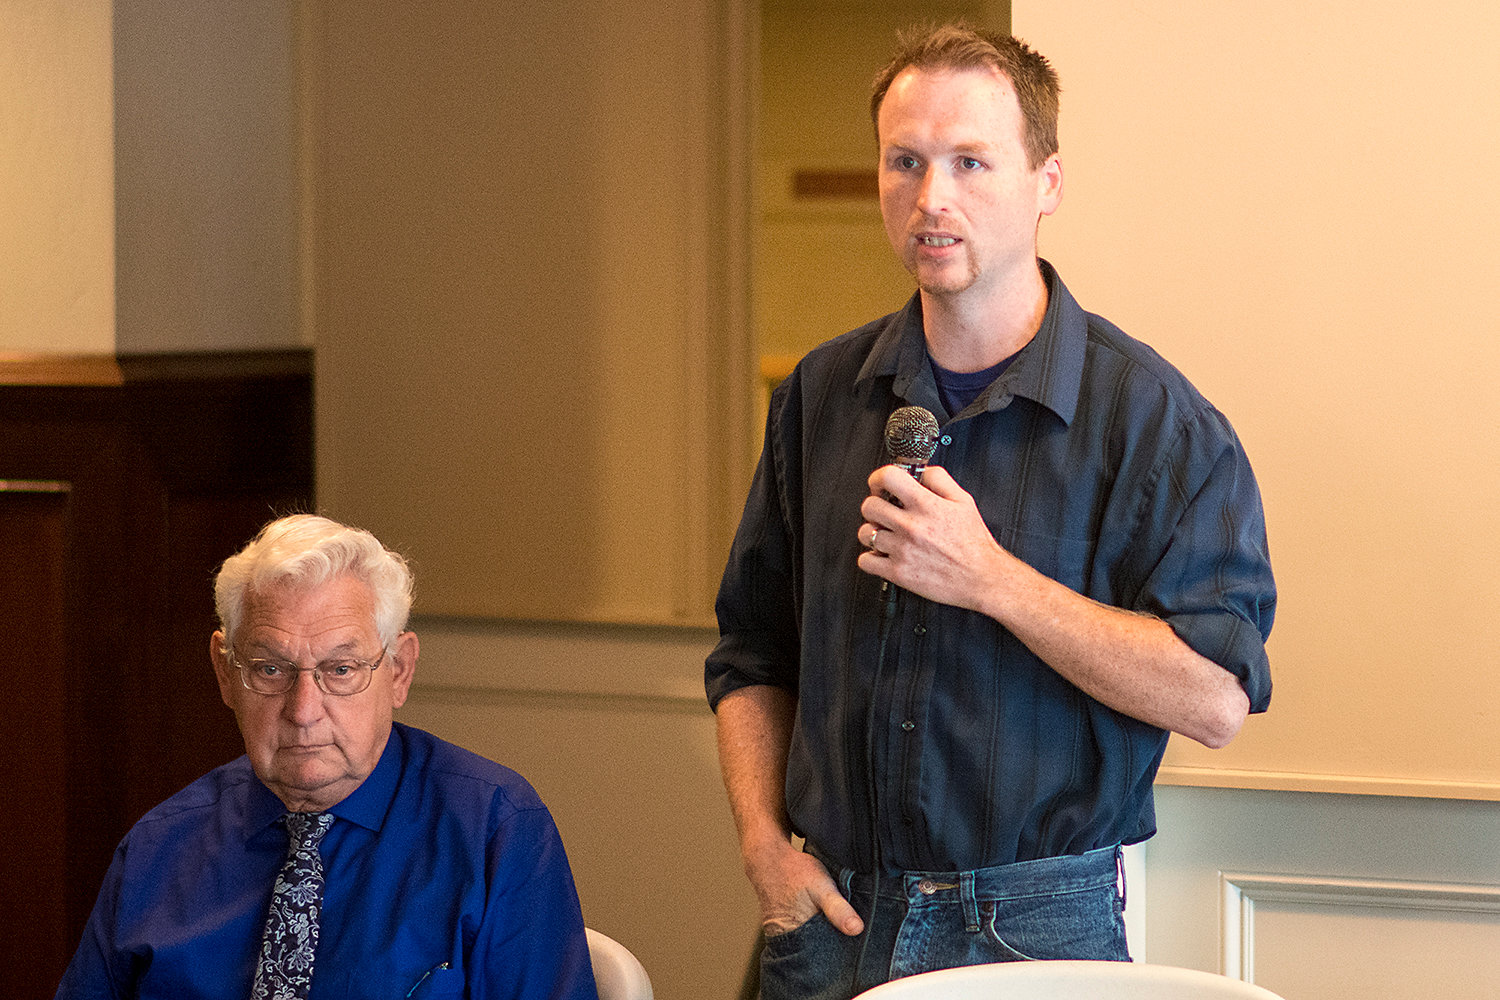 Centralia City Council candidate Ron Greenwood gives his opening statement as incumbent Lee Coumbs listens during a debate Thursday held by the Centralia-Chehalis Chamber of Commerce.